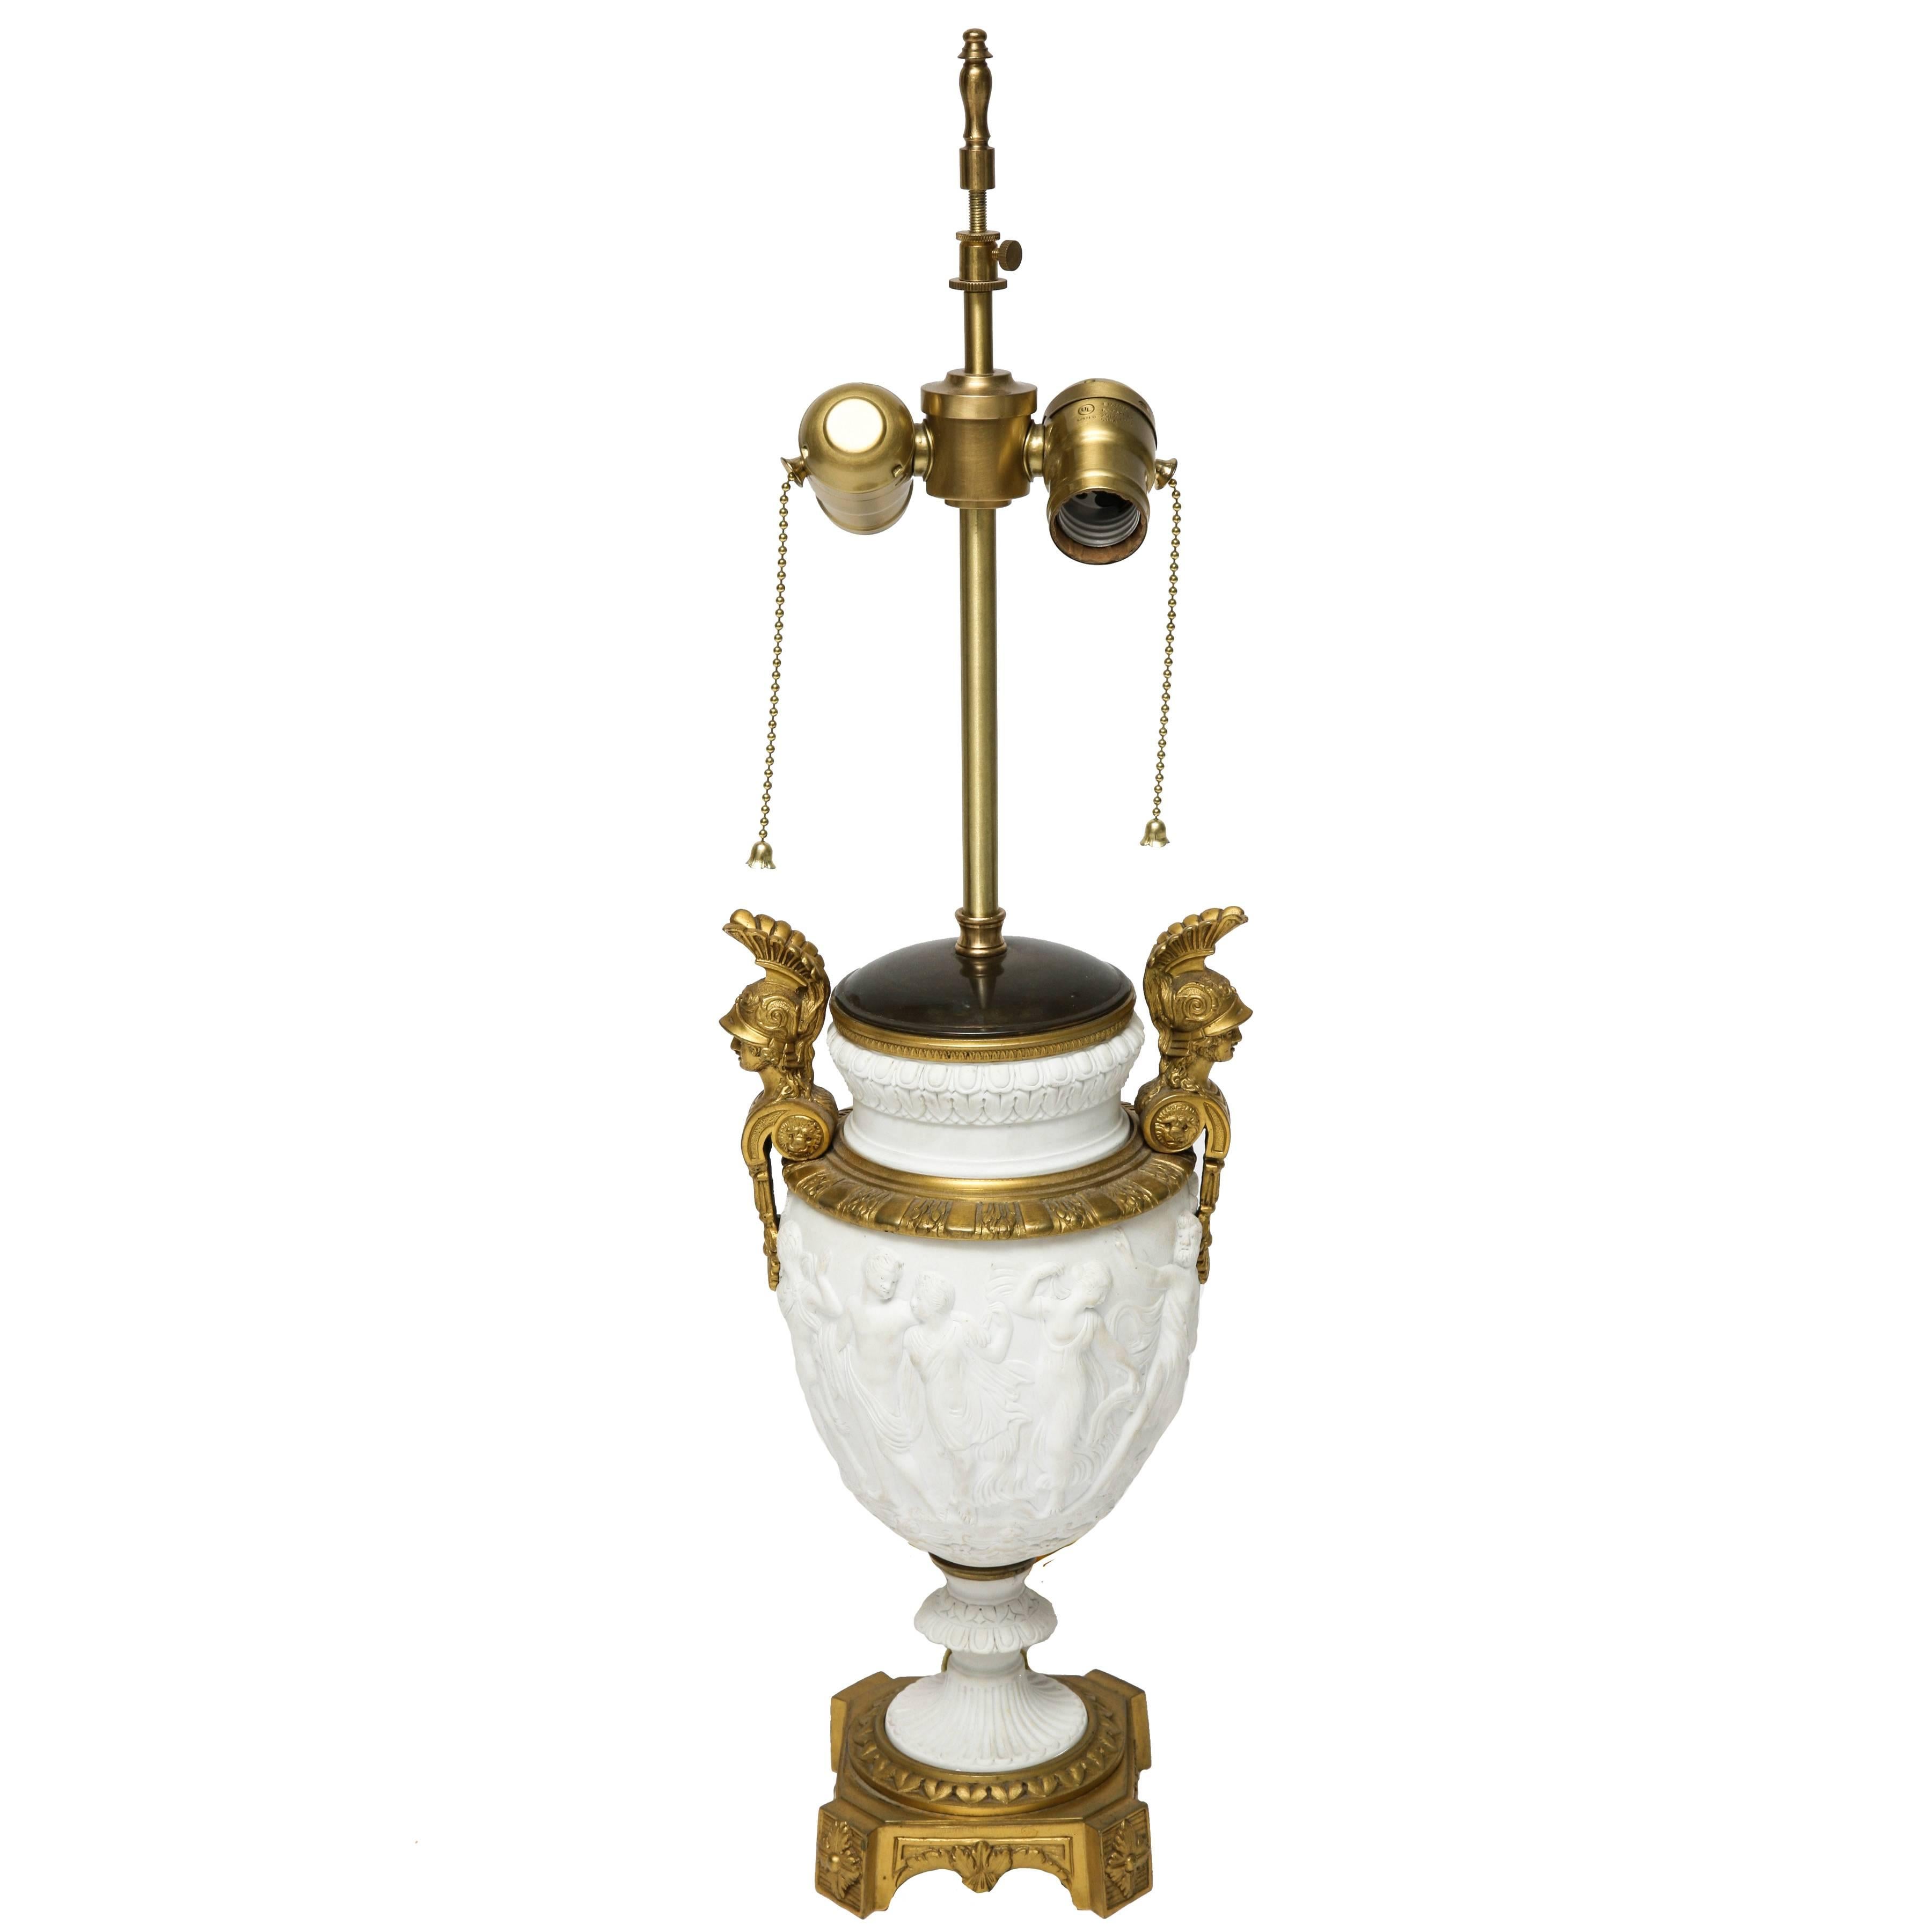 Neoclassical Style Table Lamp, 19th Century Bisque Vase with Bronze Doré Mounts